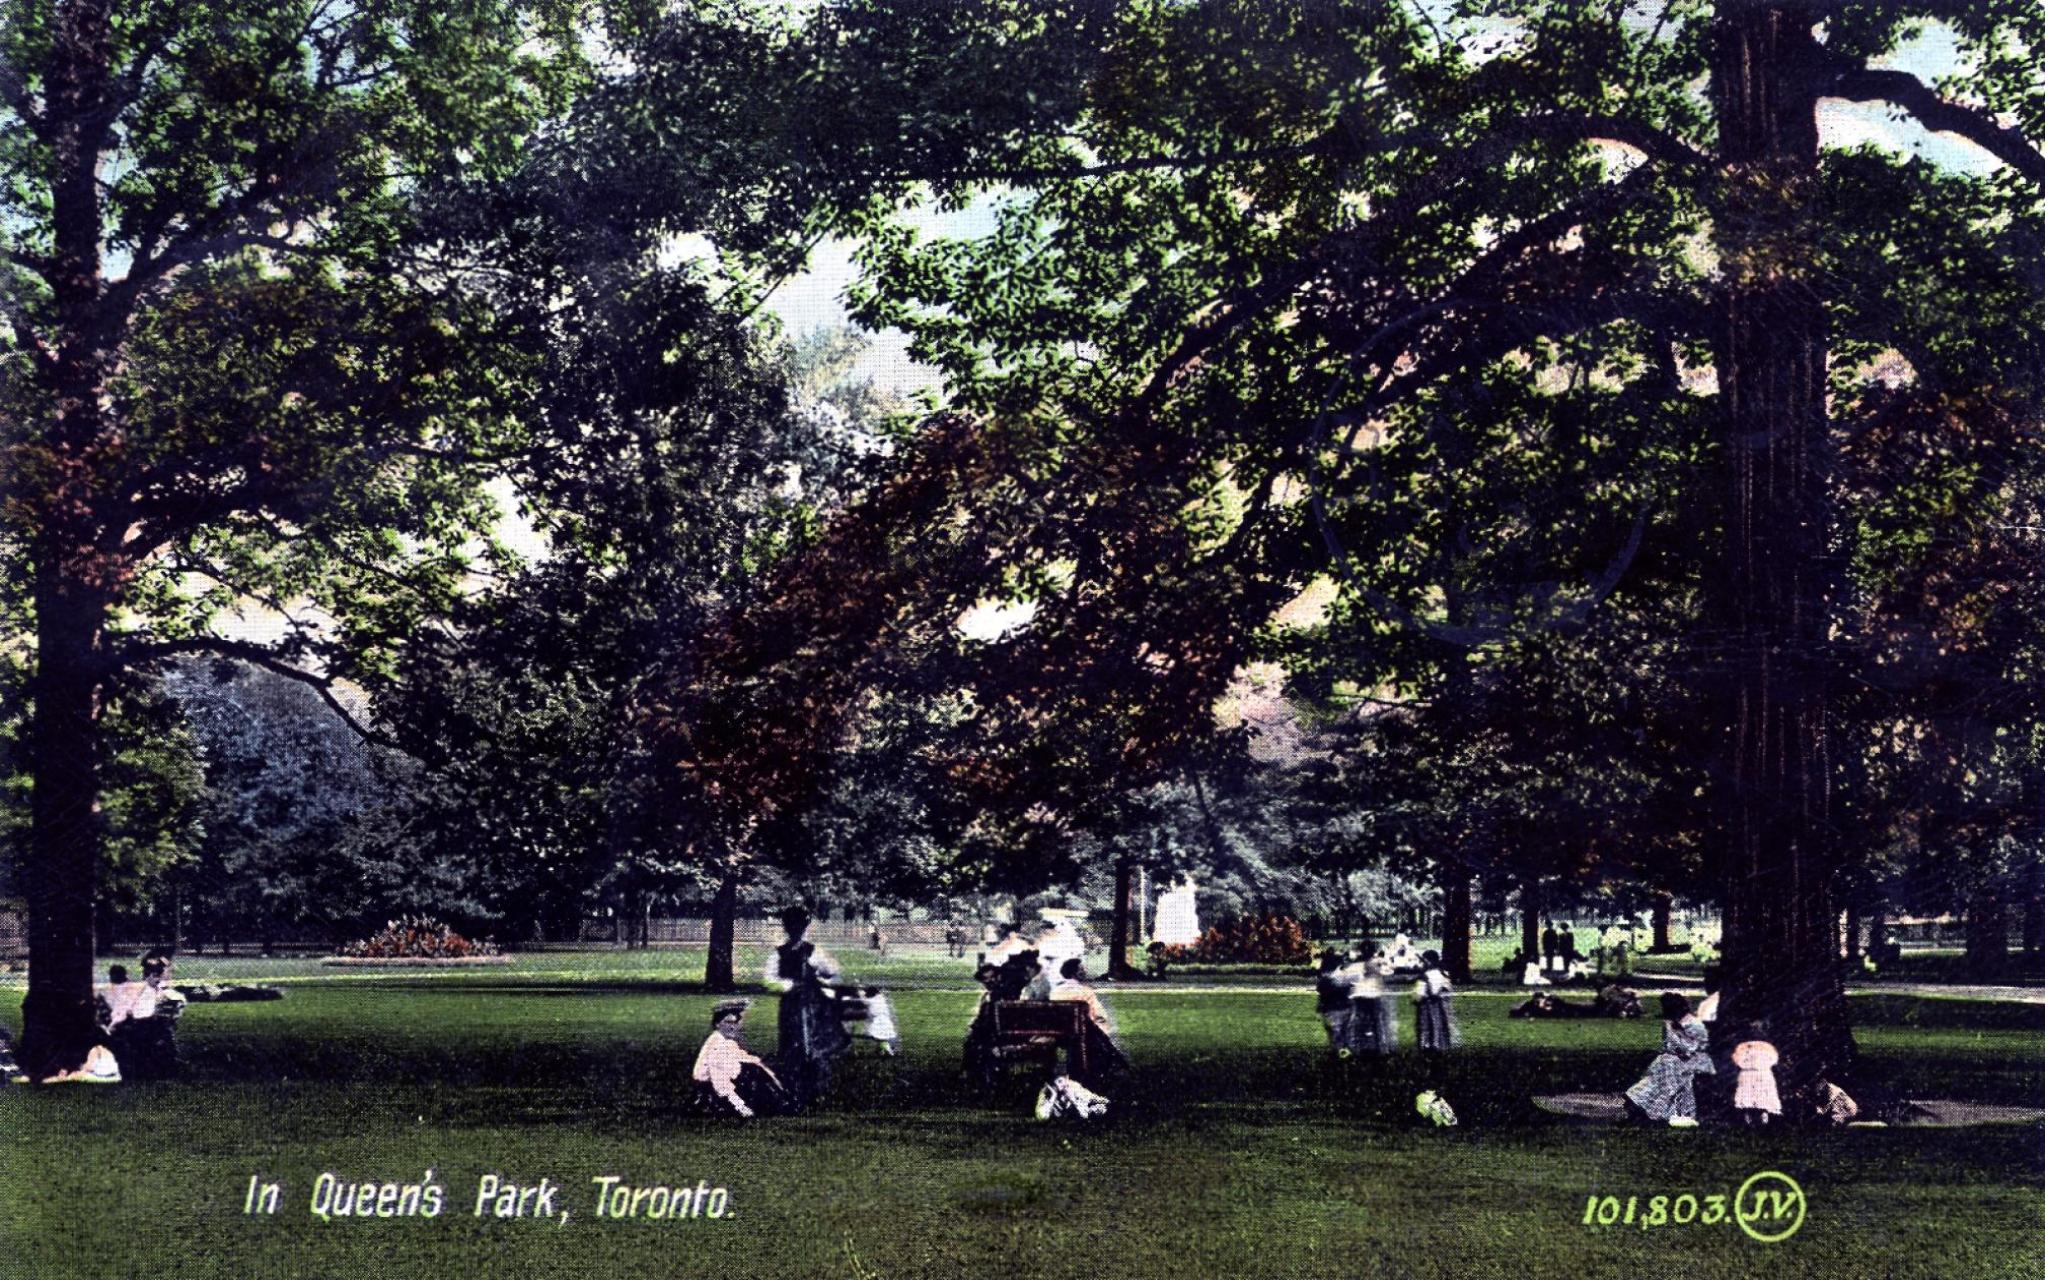 Members of the public enjoy the grounds of Queen’s Park.